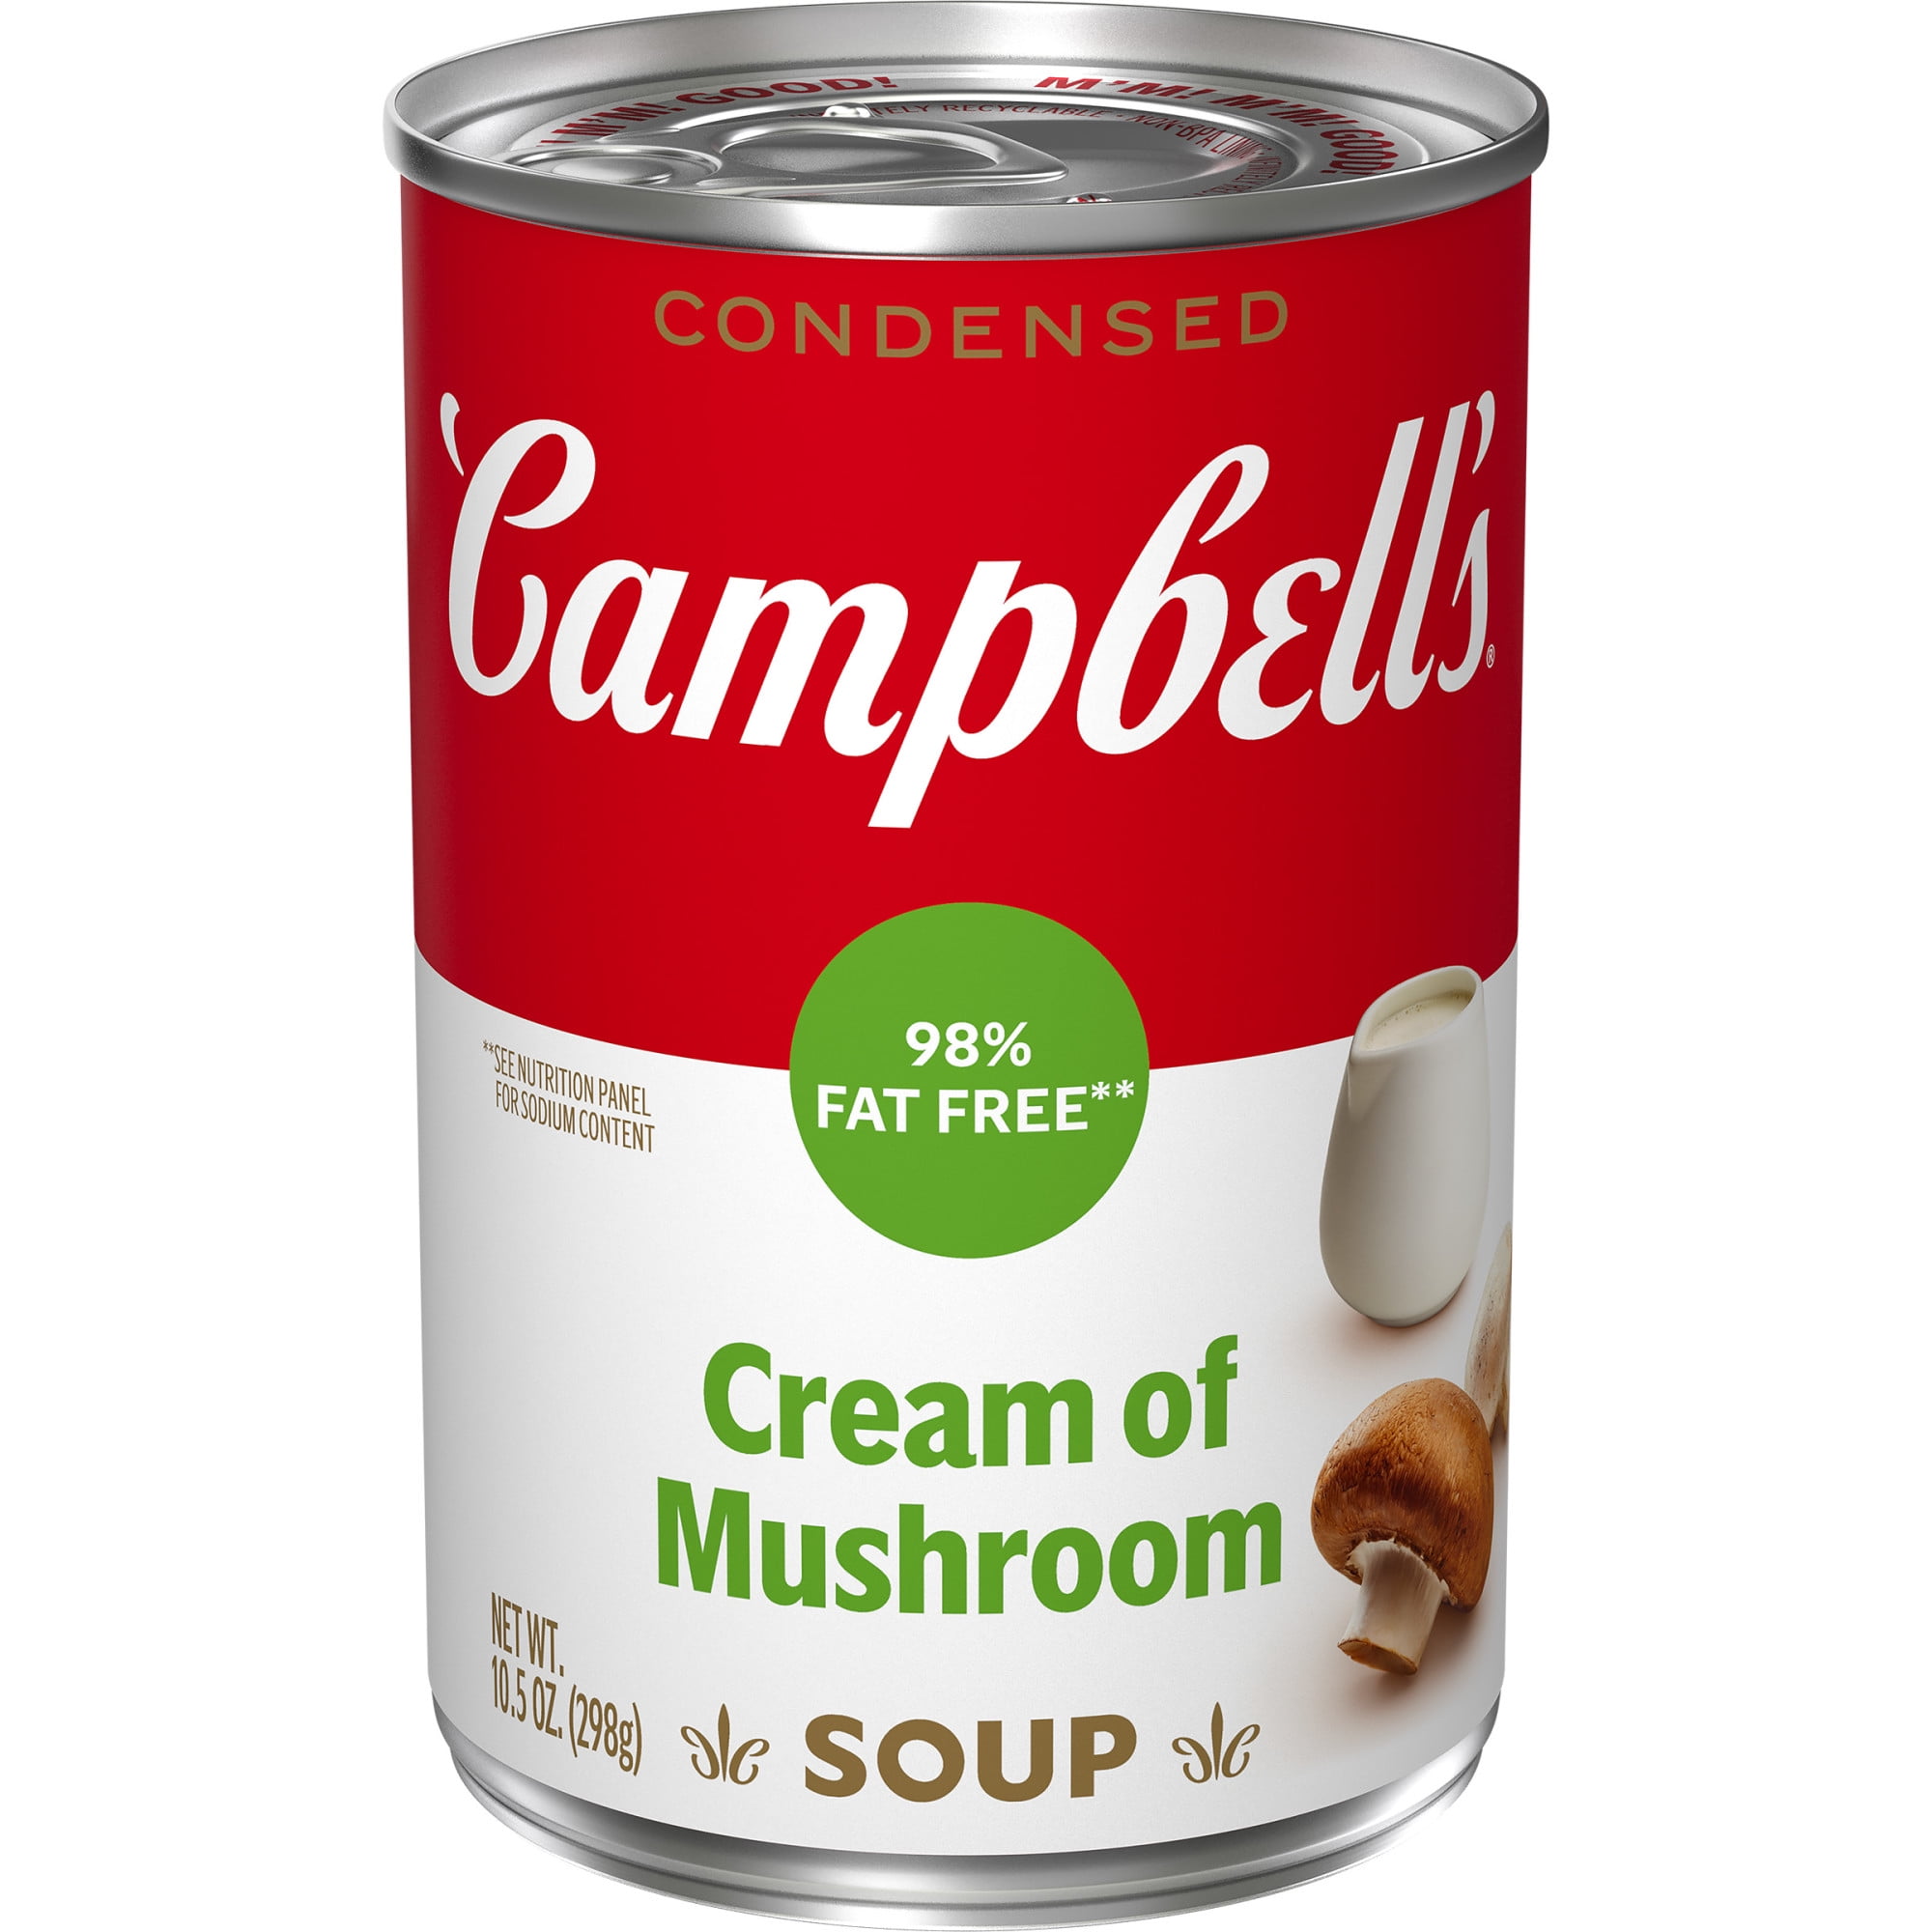 Campbells Condensed 98% Fat Free Cream of Mushroom Soup, 10.5 Ounce Can